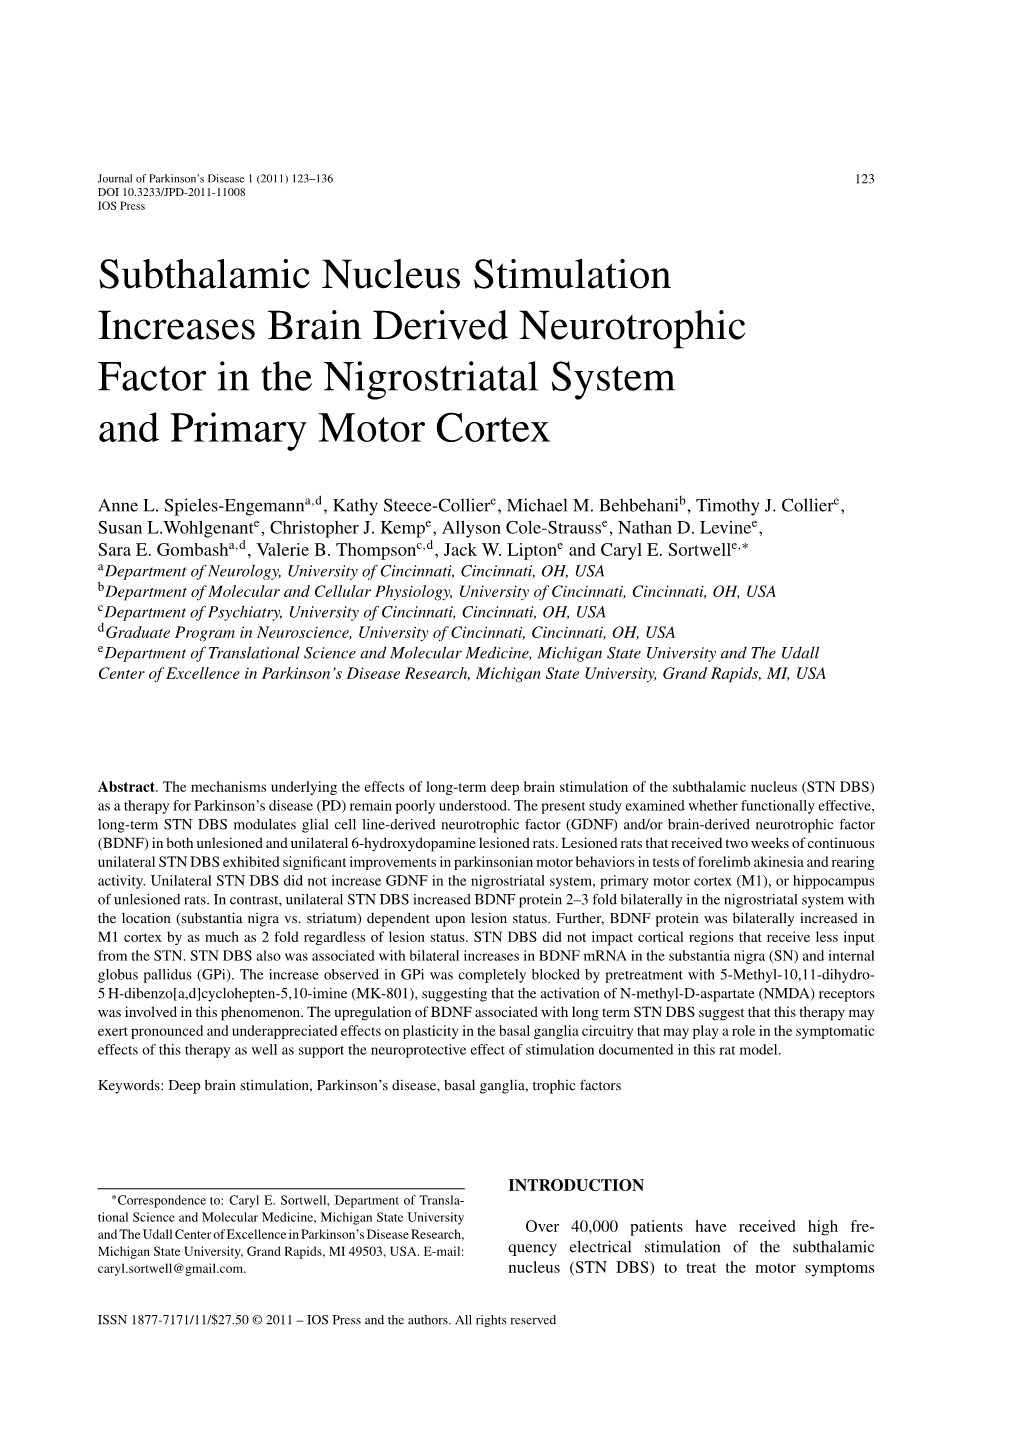 Subthalamic Nucleus Stimulation Increases Brain Derived Neurotrophic Factor in the Nigrostriatal System and Primary Motor Cortex